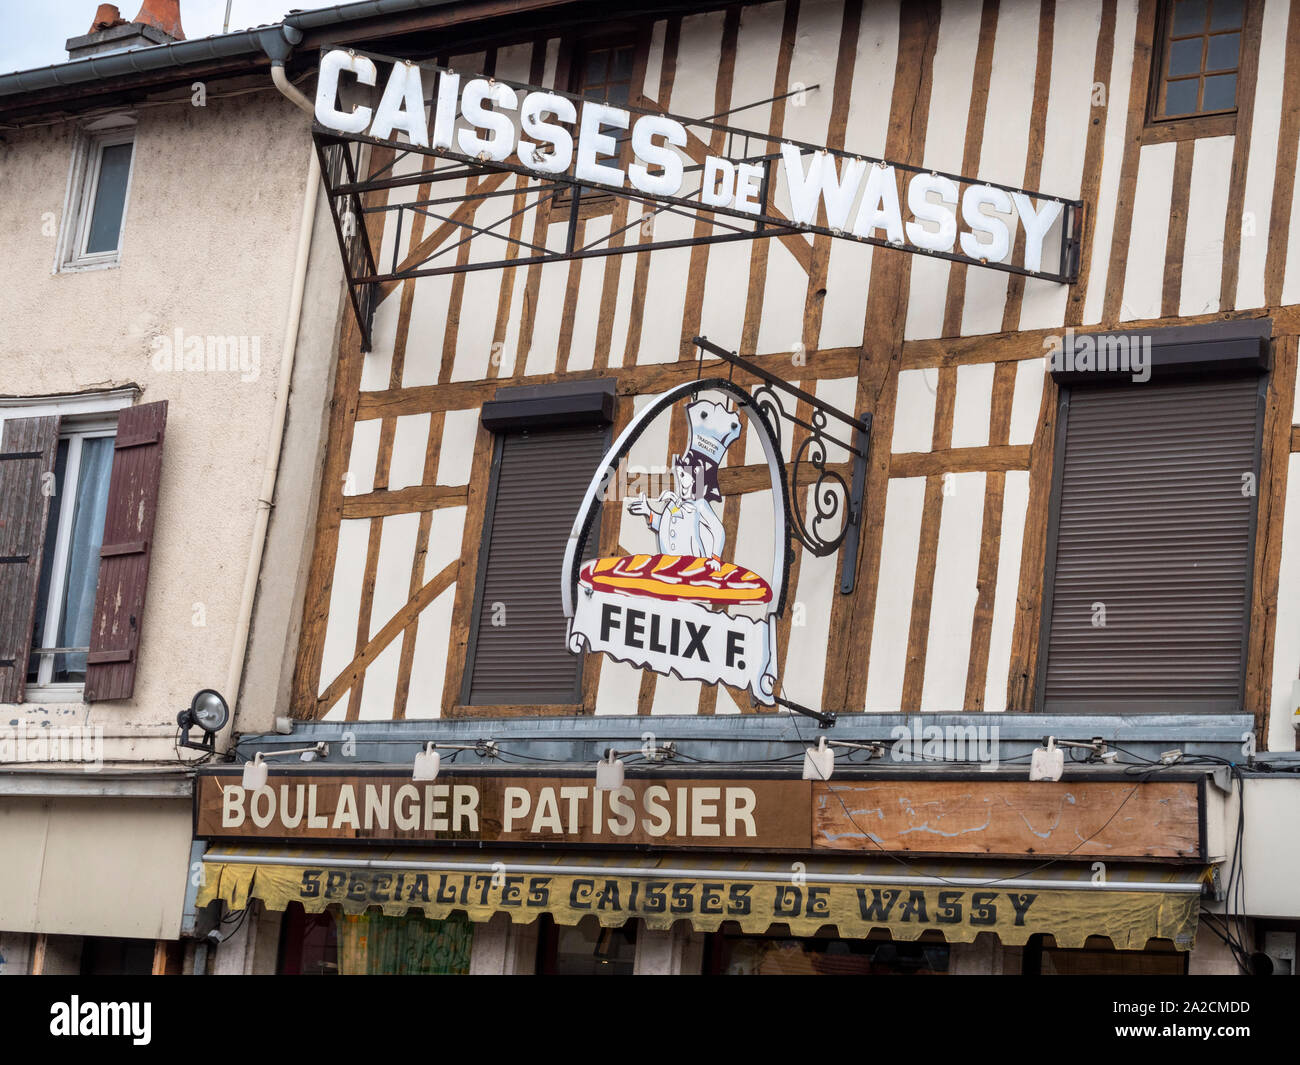 The ornate sign for Felix F boulangerie  or french bakers shop in Wassy, selling caisses de Wassy  Haut-Marne, Champagne-Ardennes region of France Stock Photo